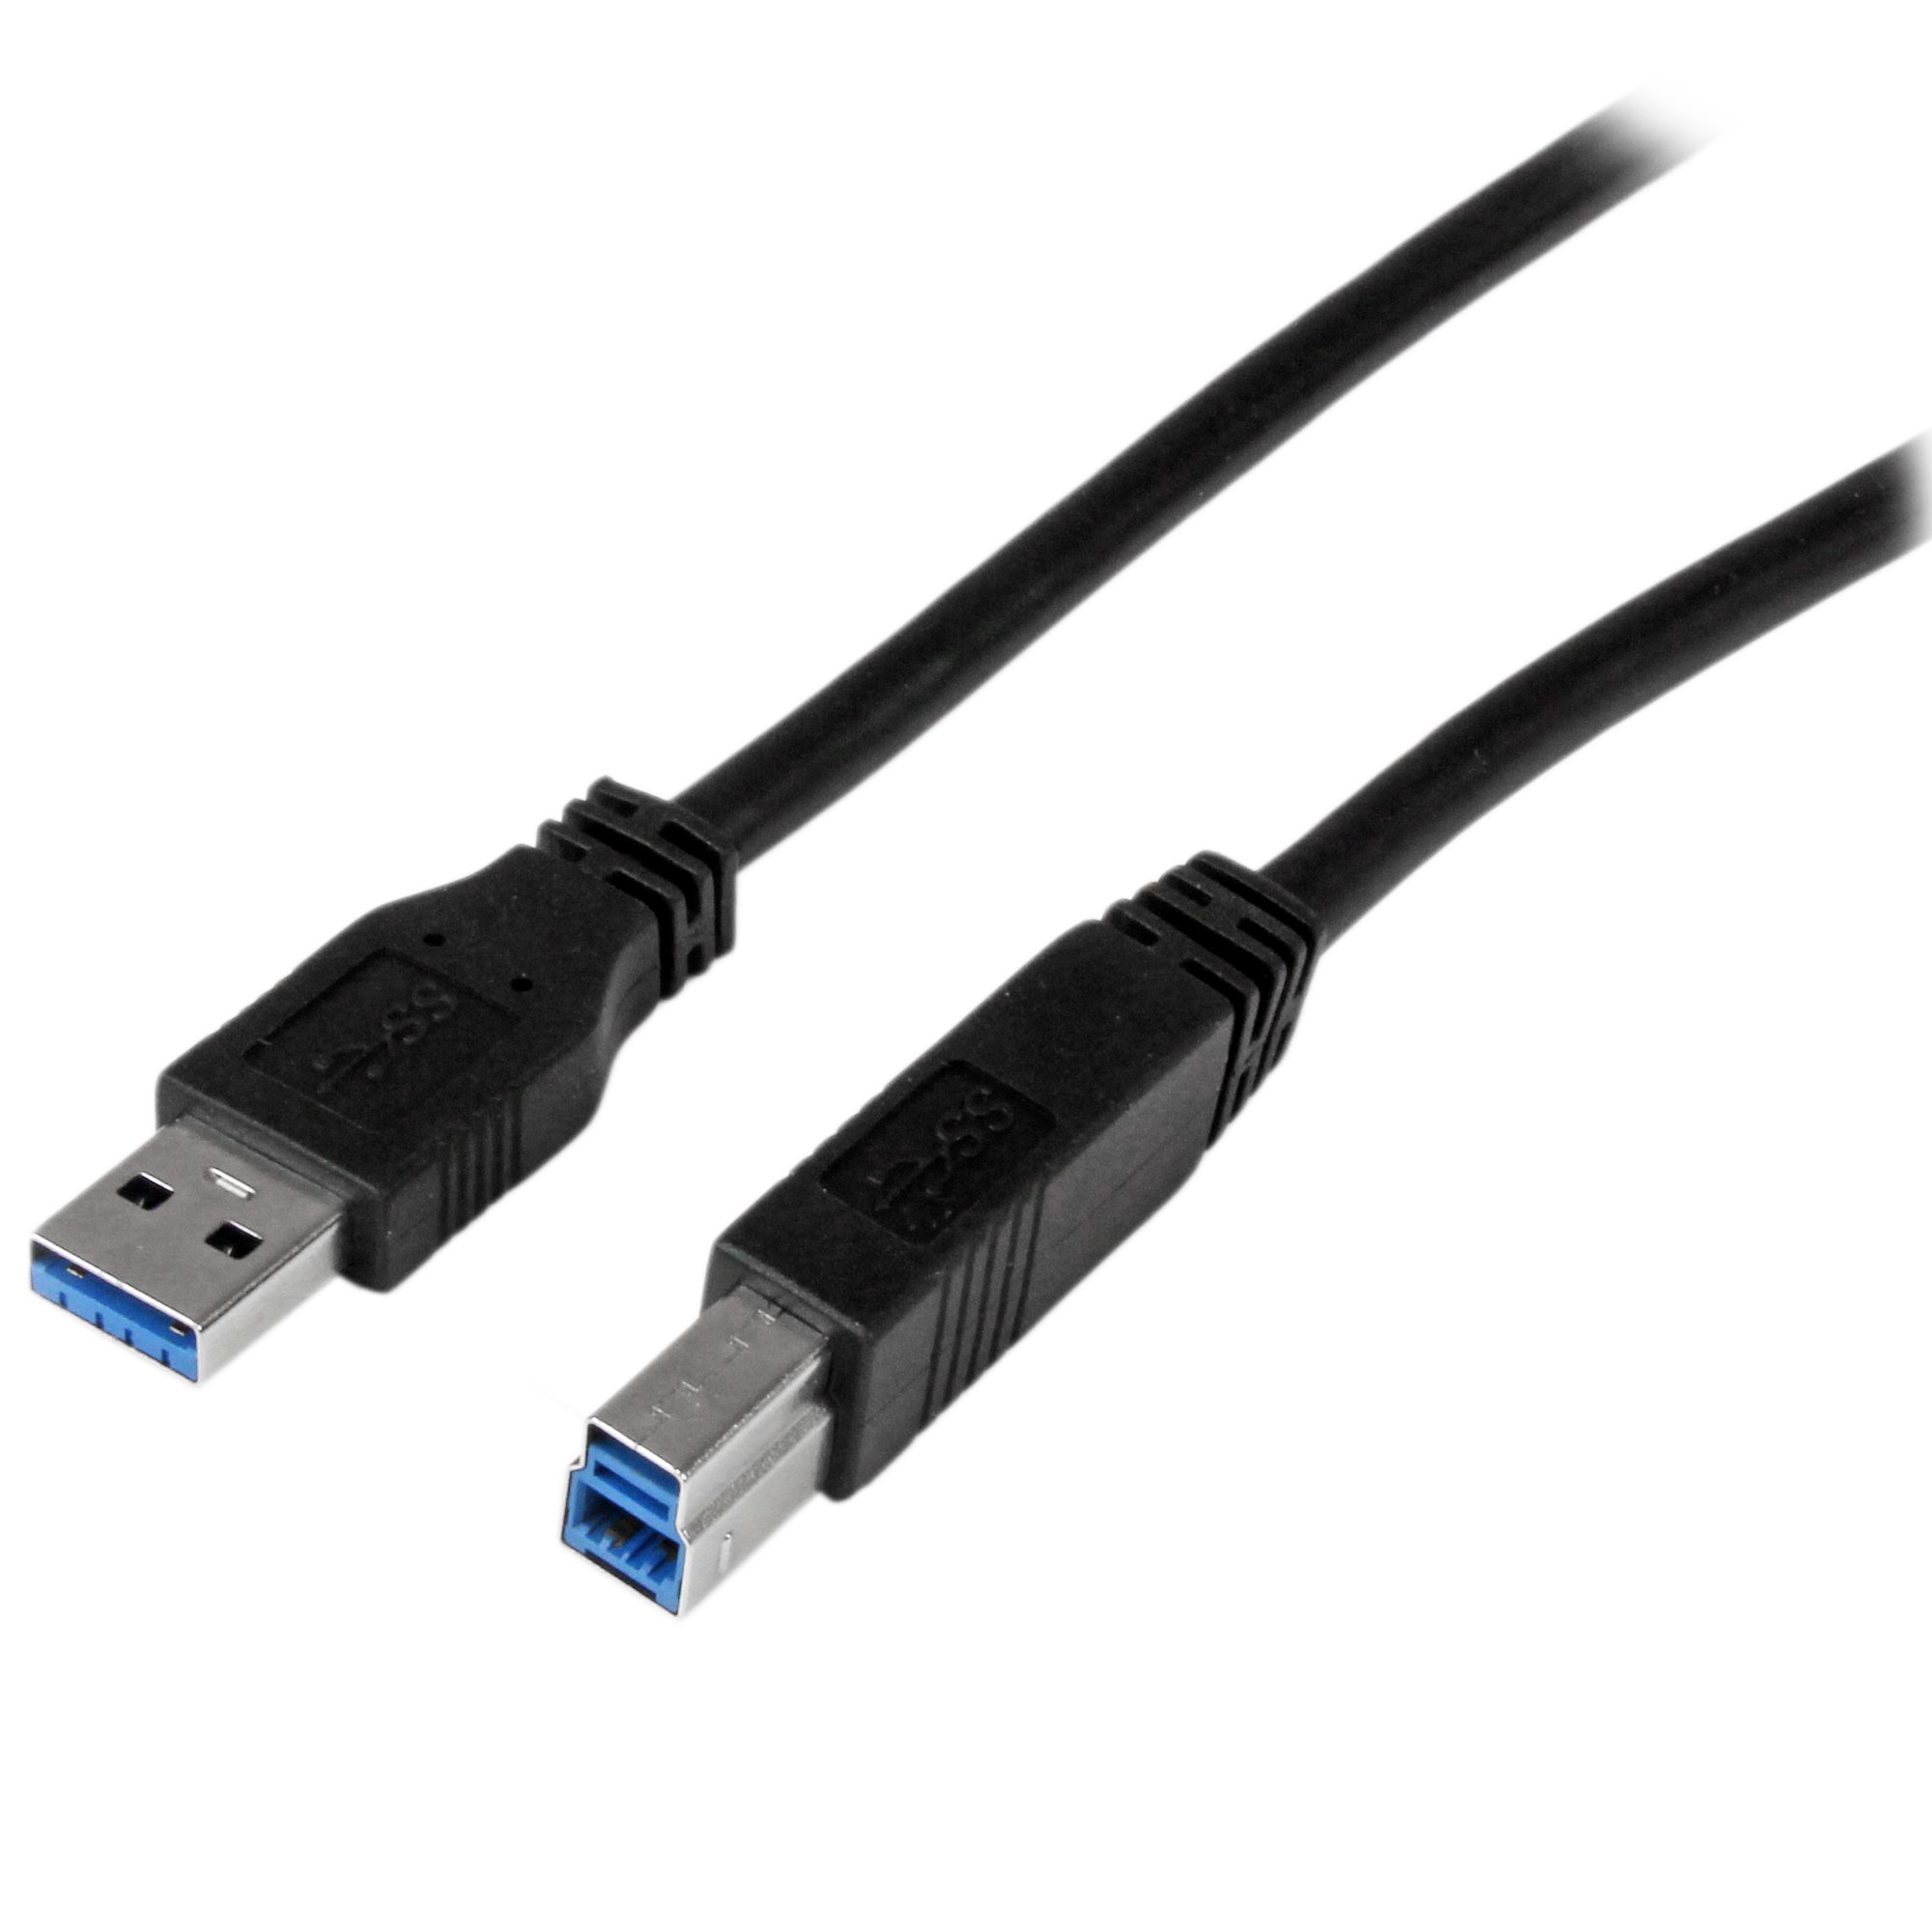 2m 6 ft Certified USB 3.0 A to B cable - Cables USB 3.0